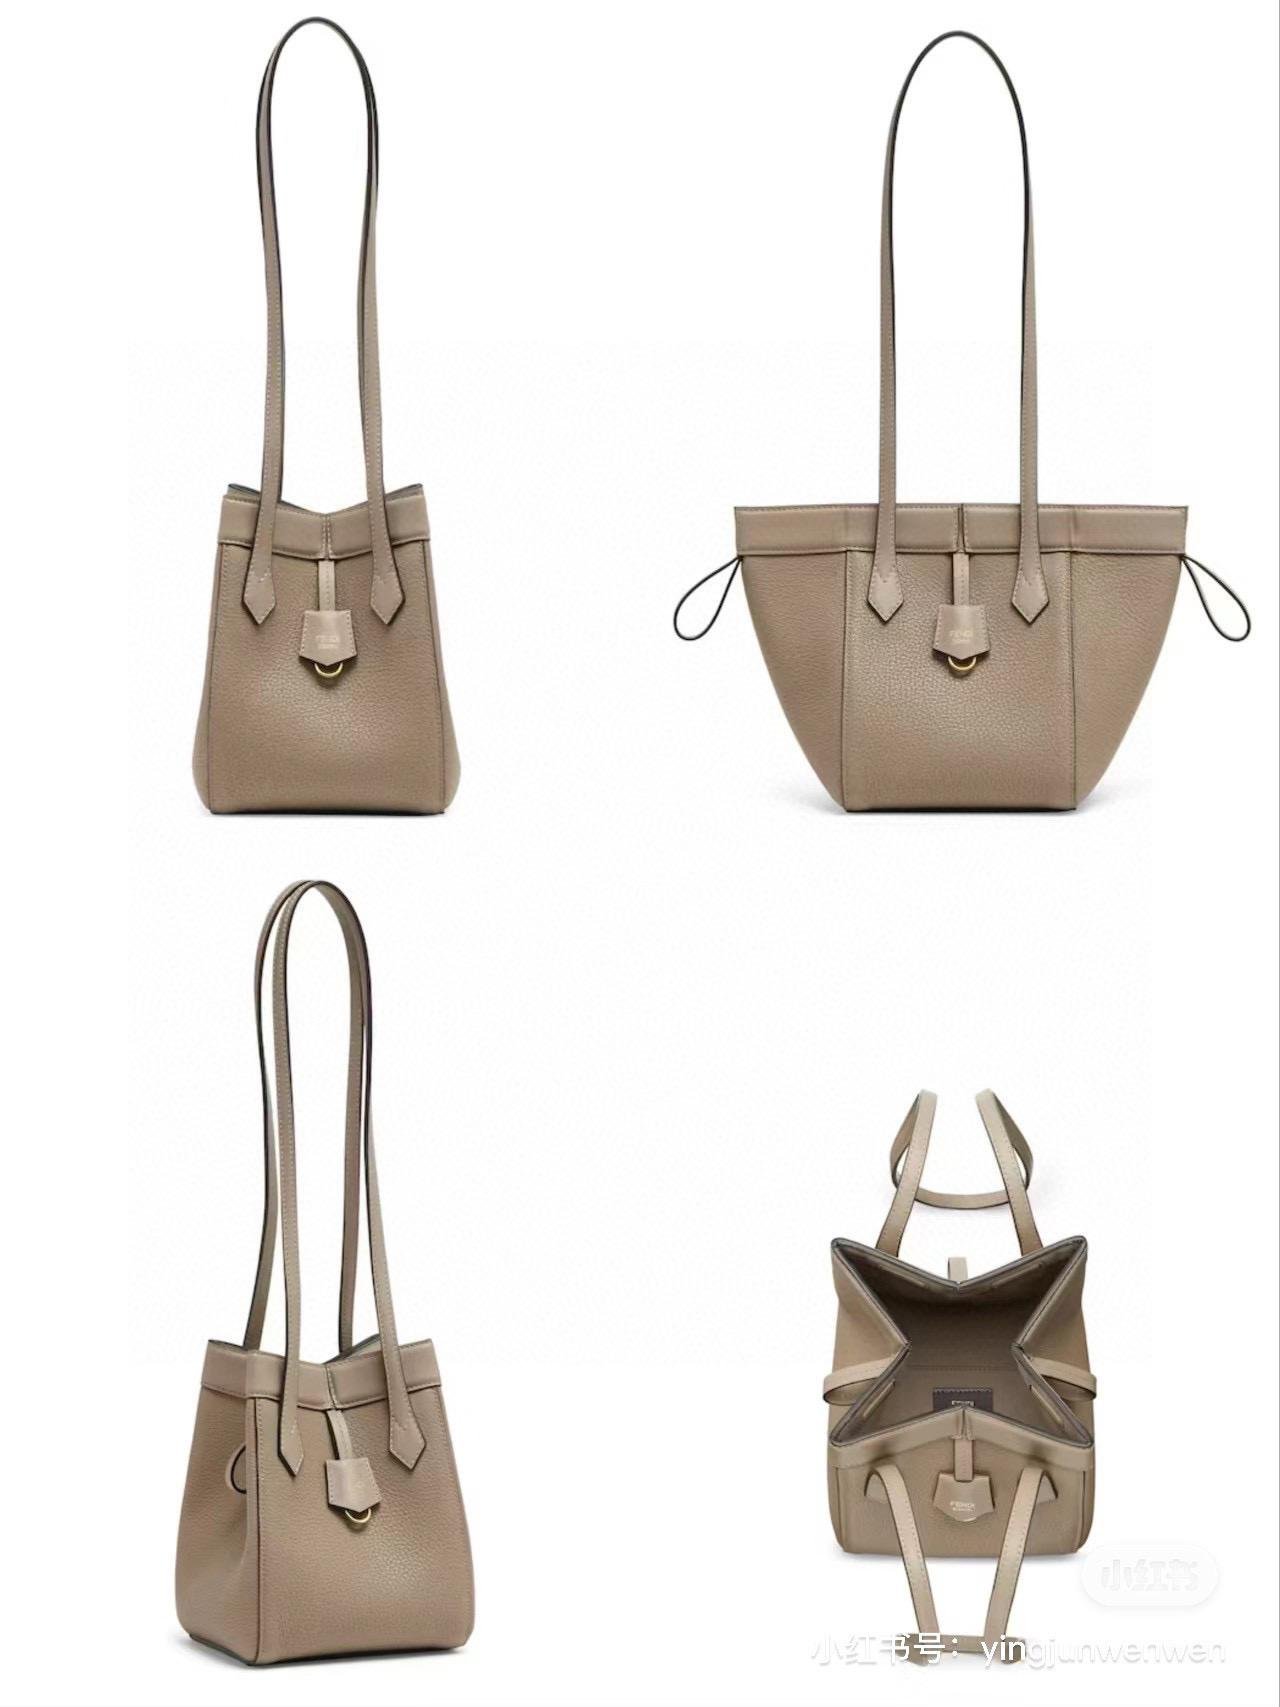       Origami Bags Cheap       Origami Bags discount       leather handbag Price 3